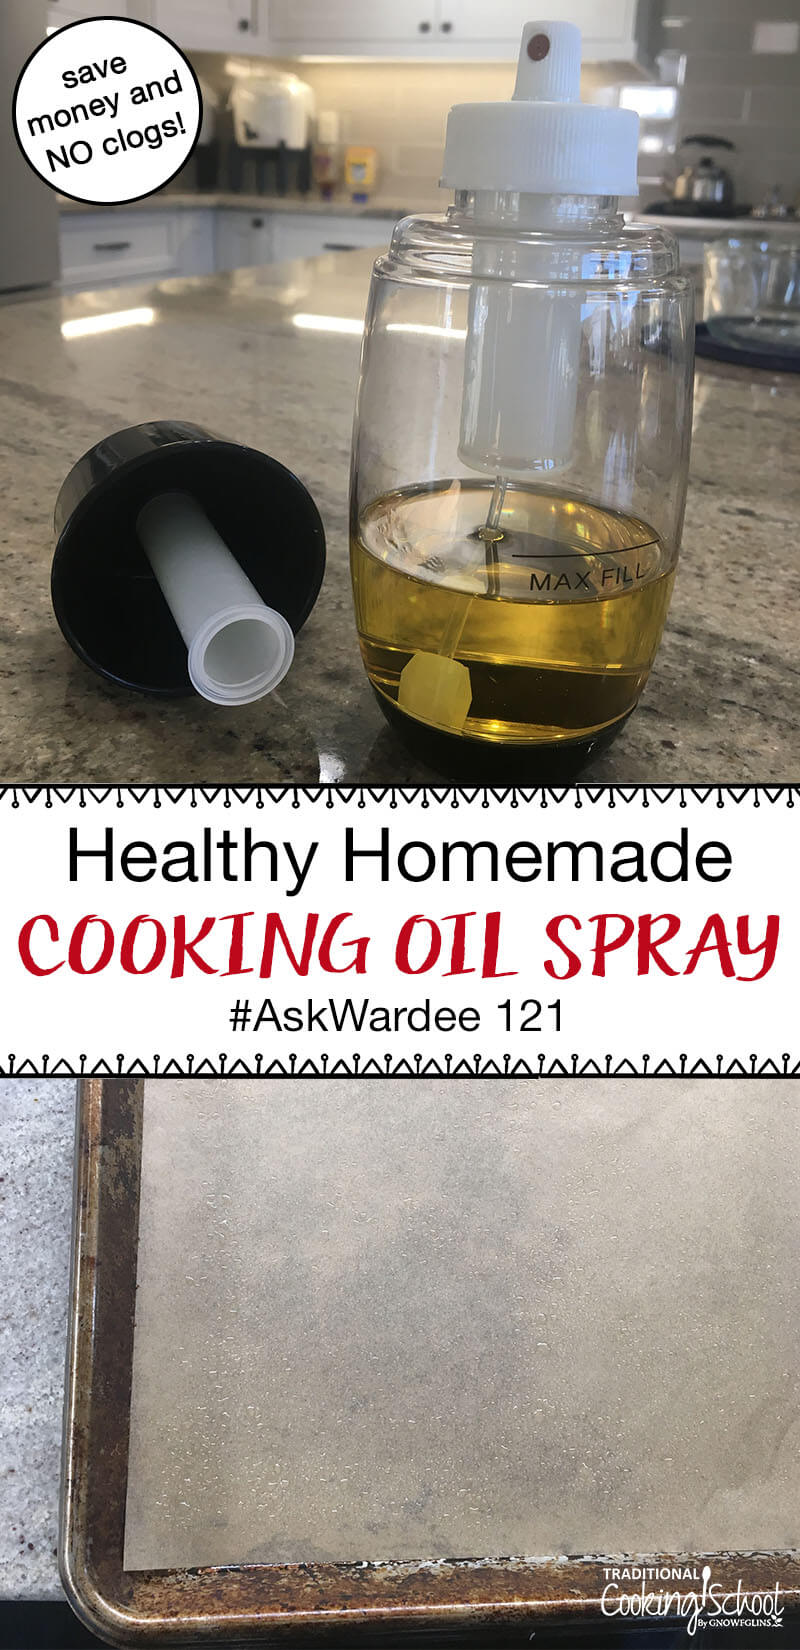 photo collage of a oil mister half full of avocado oil that has been spritzed on a baking tray with text overlay: "Healthy Homemade Cooking Oil Spray"